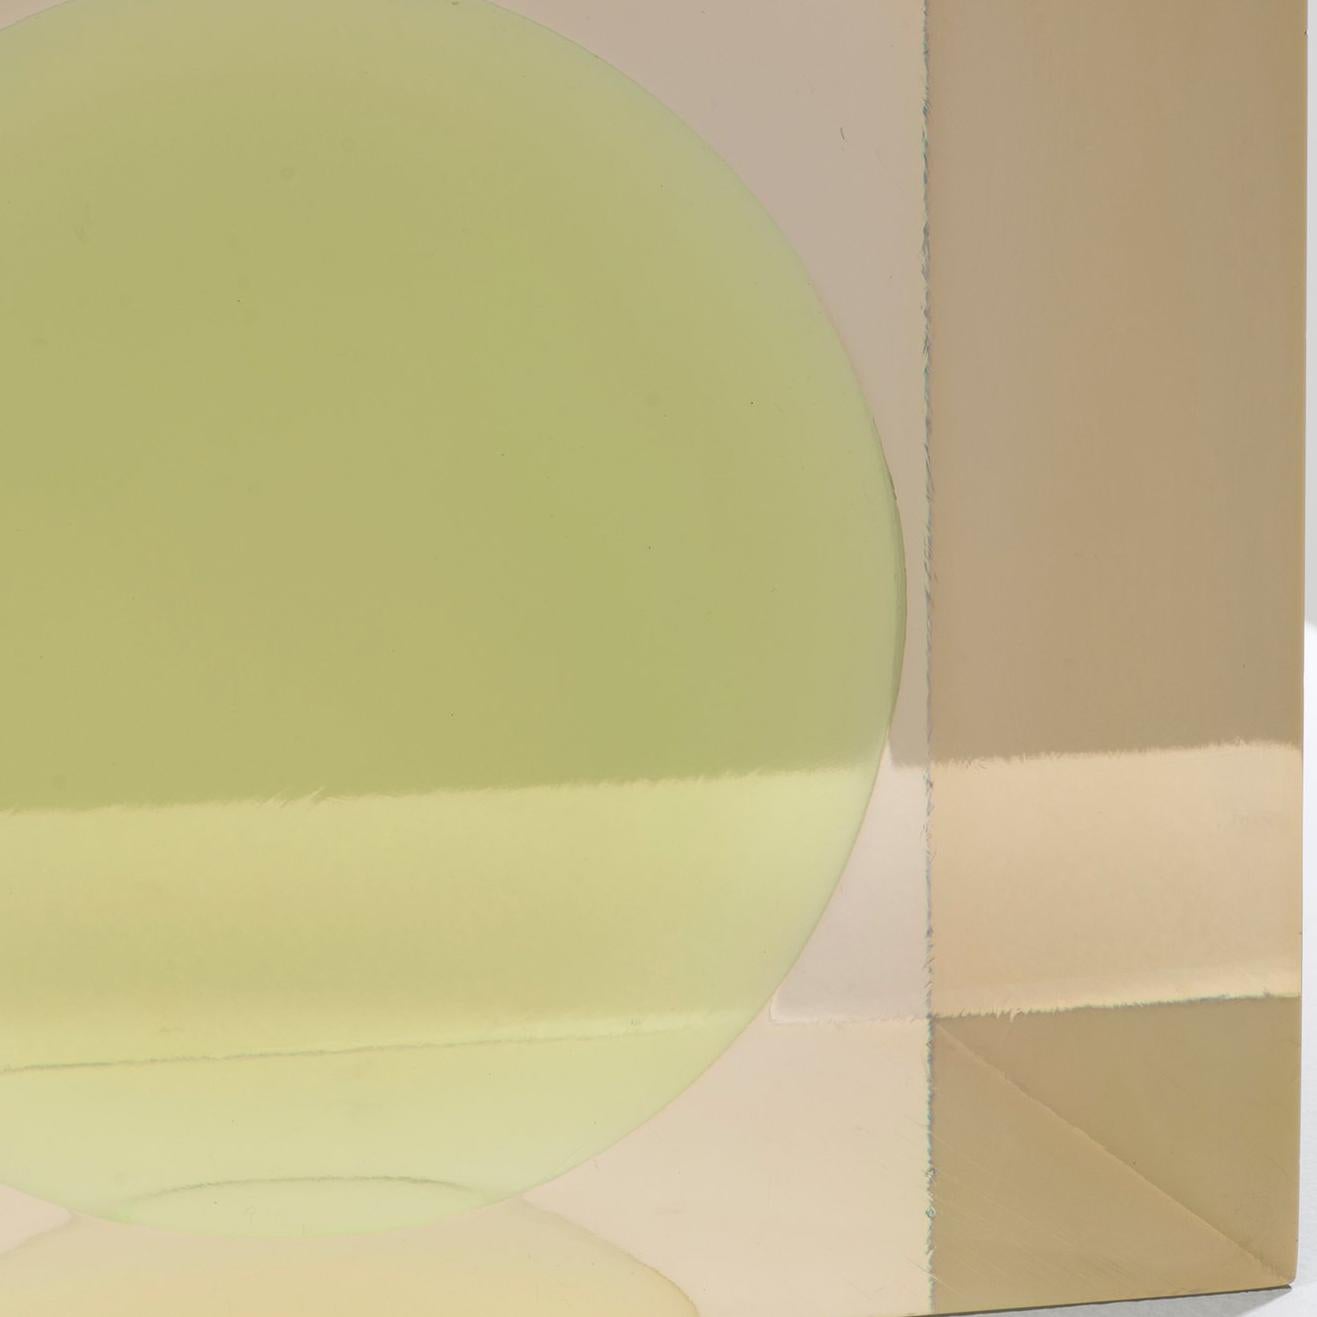 Cube With Green Sphere - Minimalist Sculpture by Peter Alexander